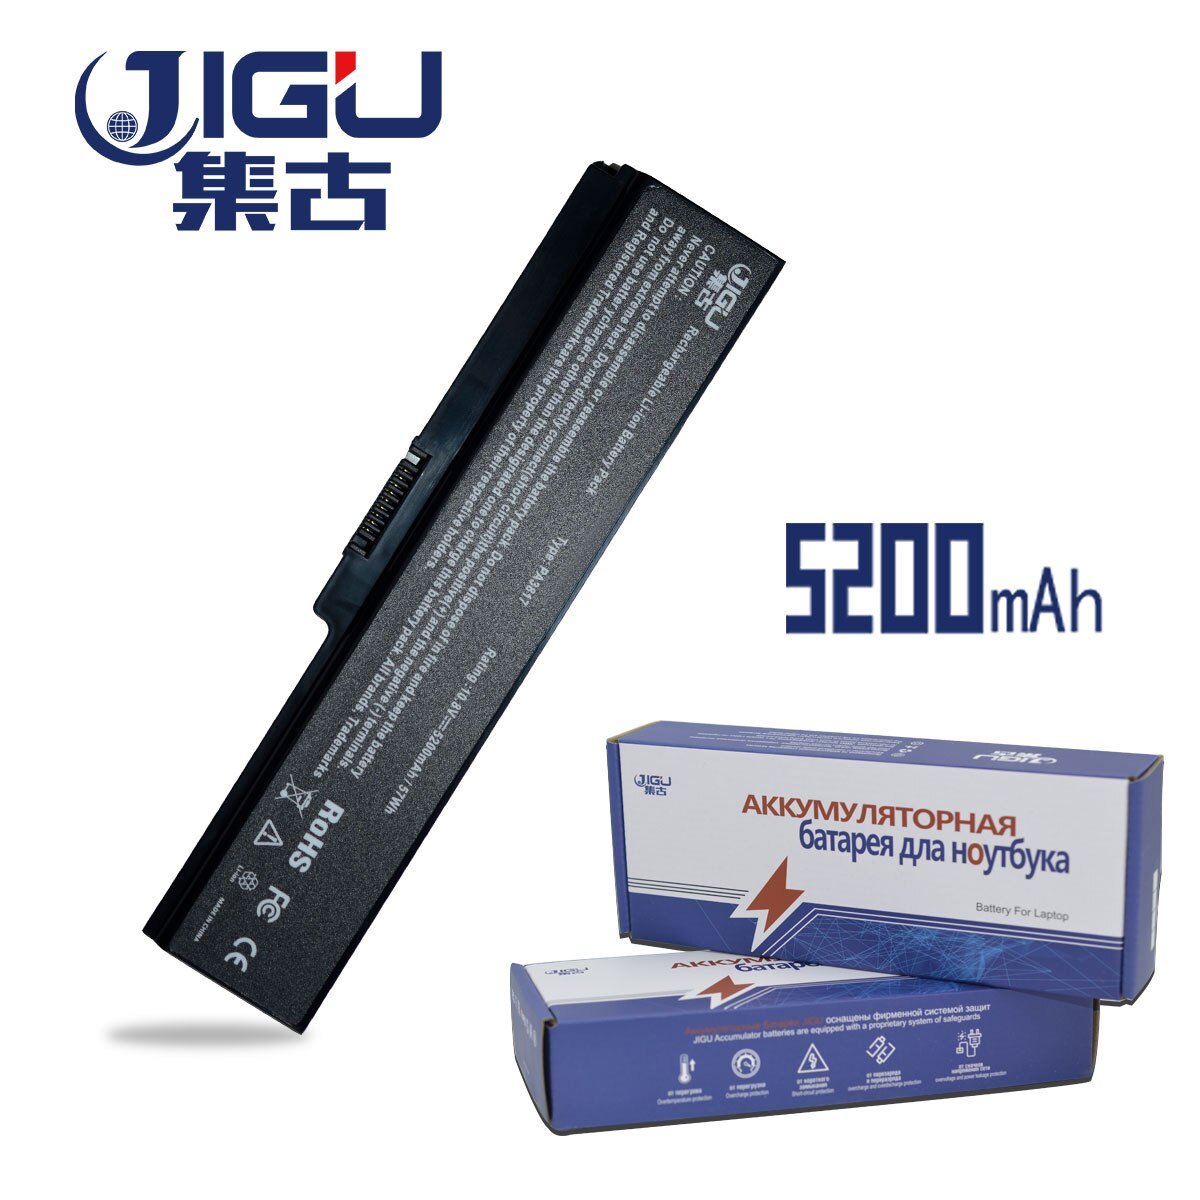 JIGU New Laptop Replacement Battery For TOSHIBA Satellite L645 L655 L700 L730 L735 L740 L745 L750 L755 PA3817 PA3817U GreatEagleInc